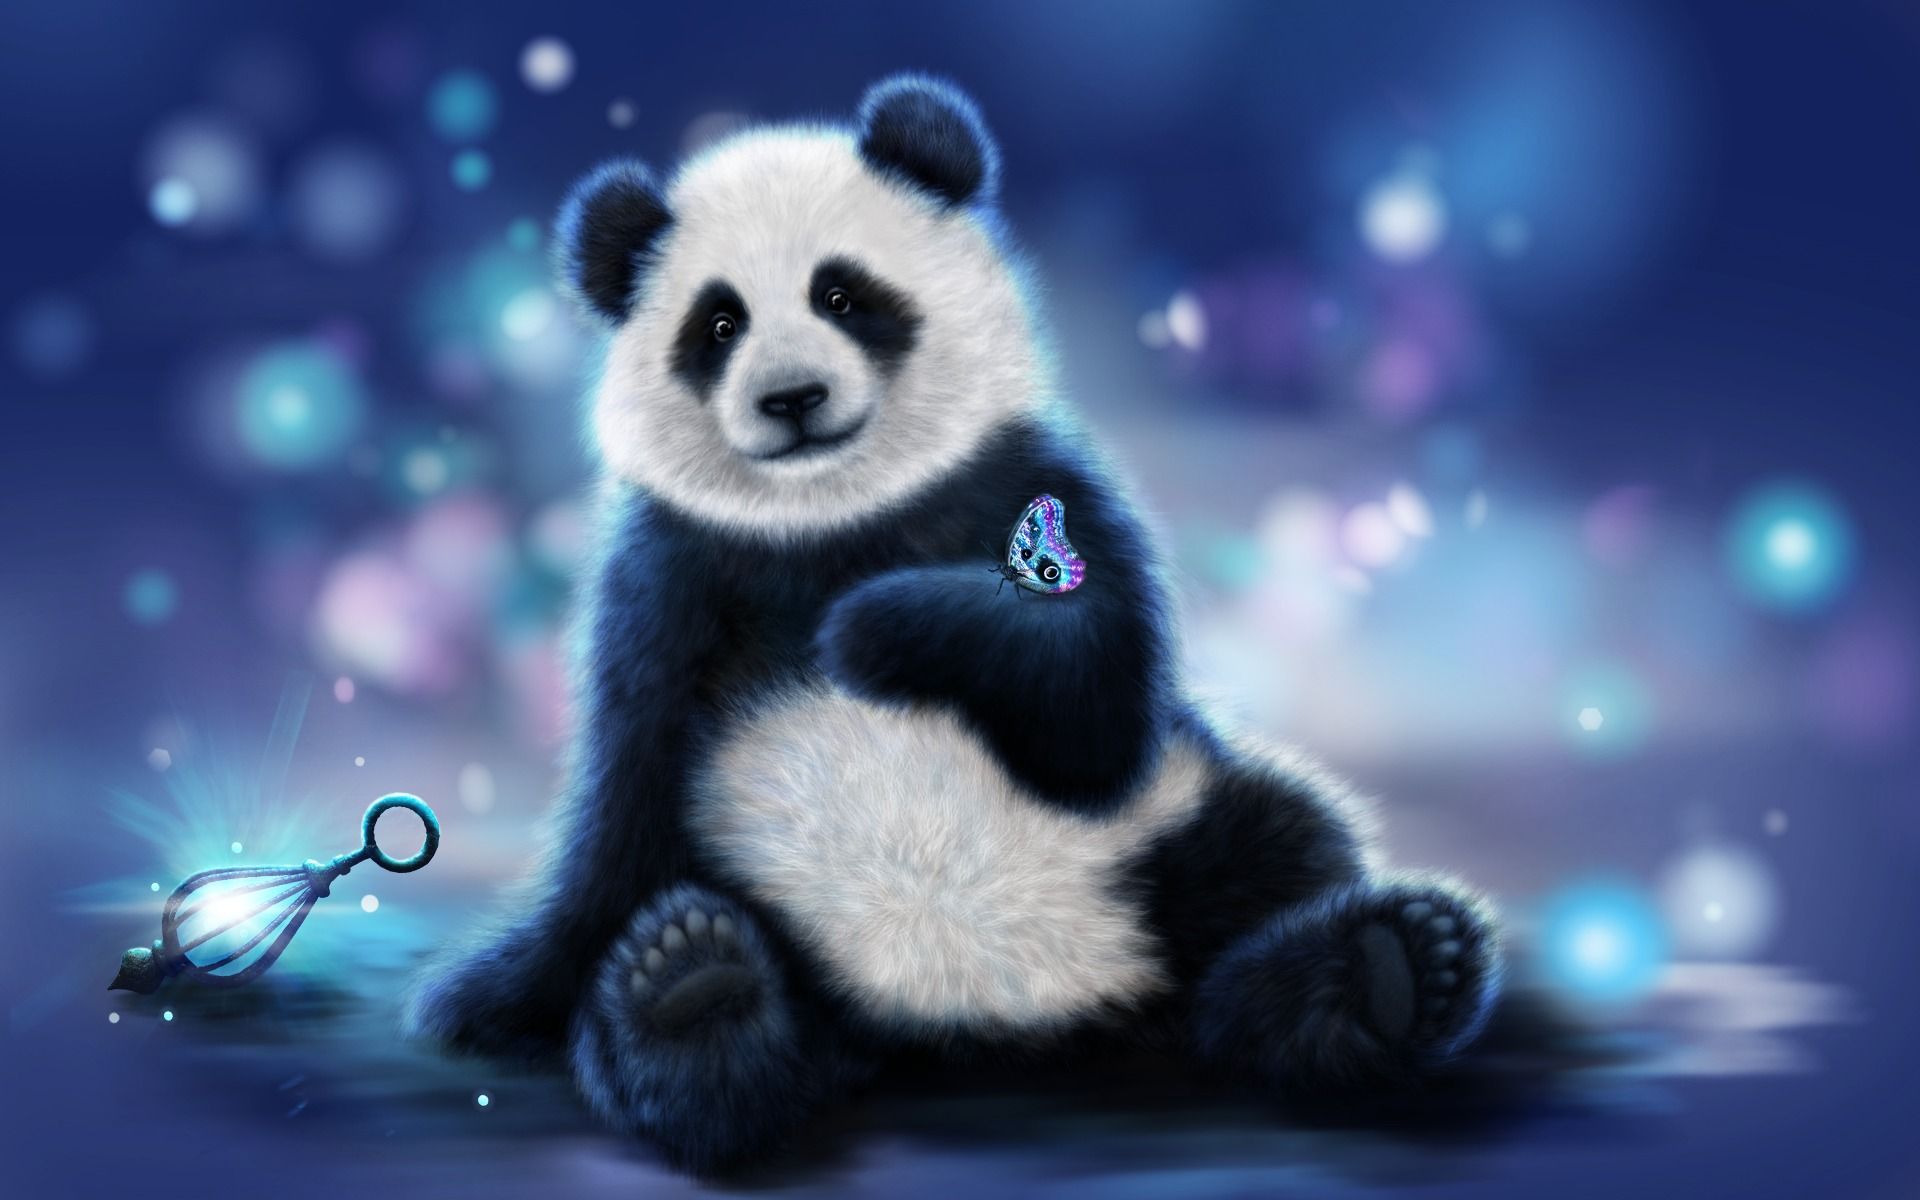 The panda is holding a butterfly - Panda